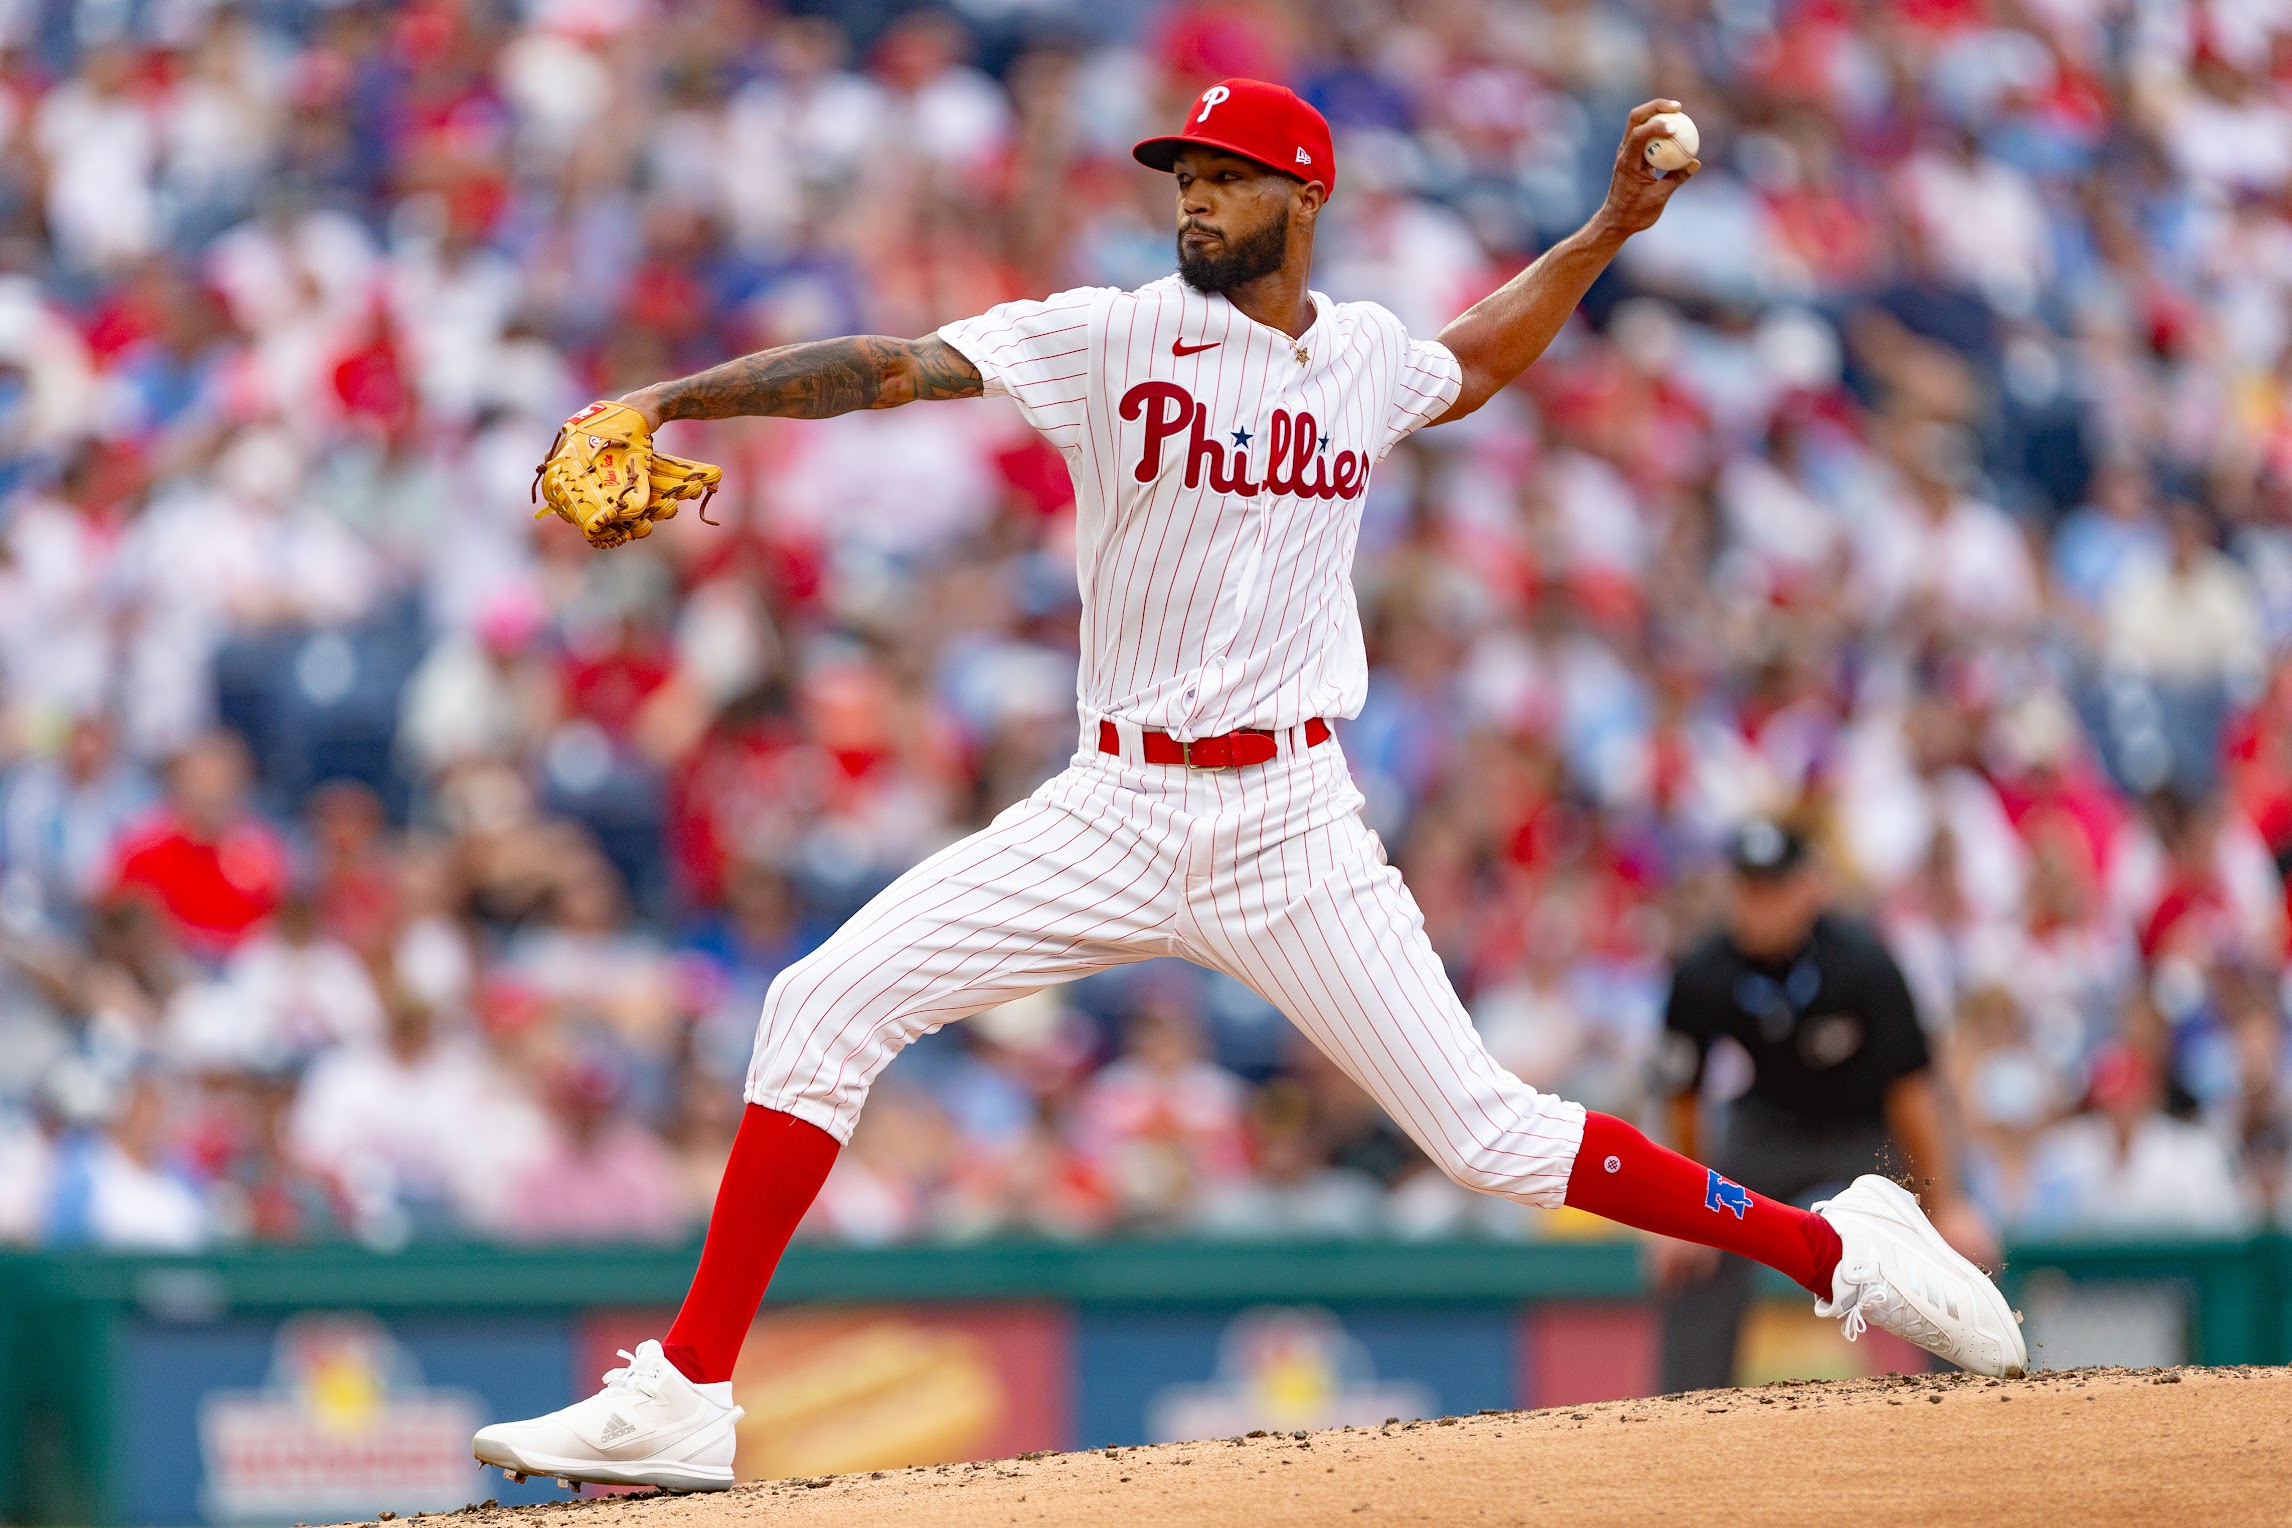 Behind solid Sánchez outing, Phillies drop series to Braves  Phillies  Nation - Your source for Philadelphia Phillies news, opinion, history,  rumors, events, and other fun stuff.